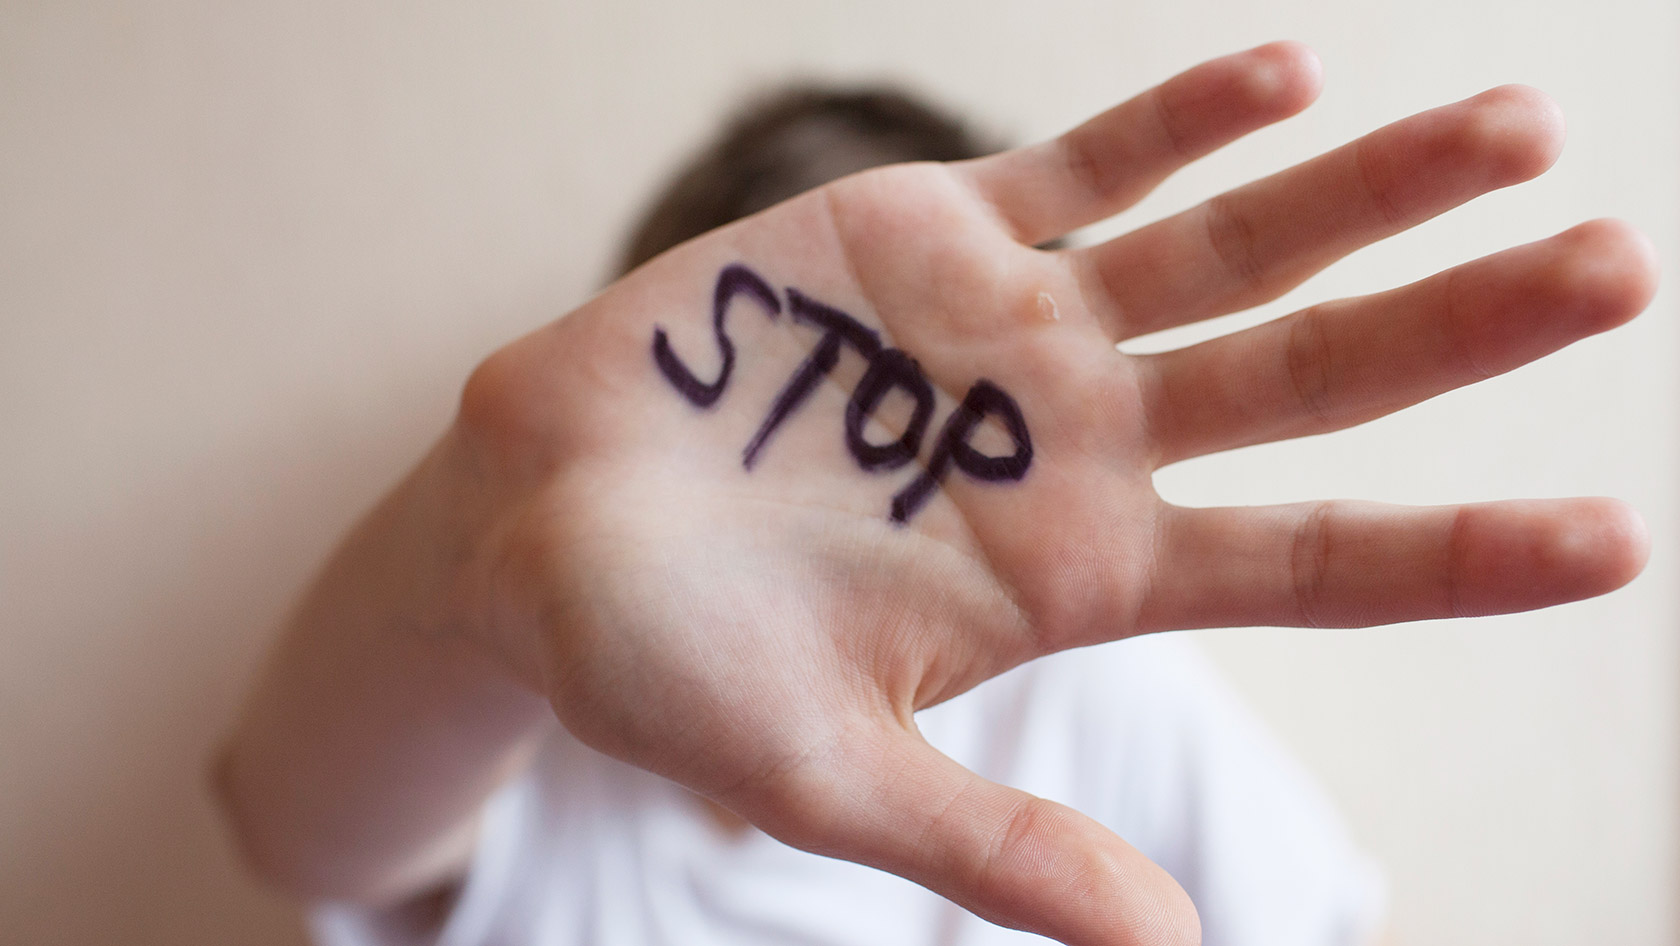 Hand with "Stop" in front of face